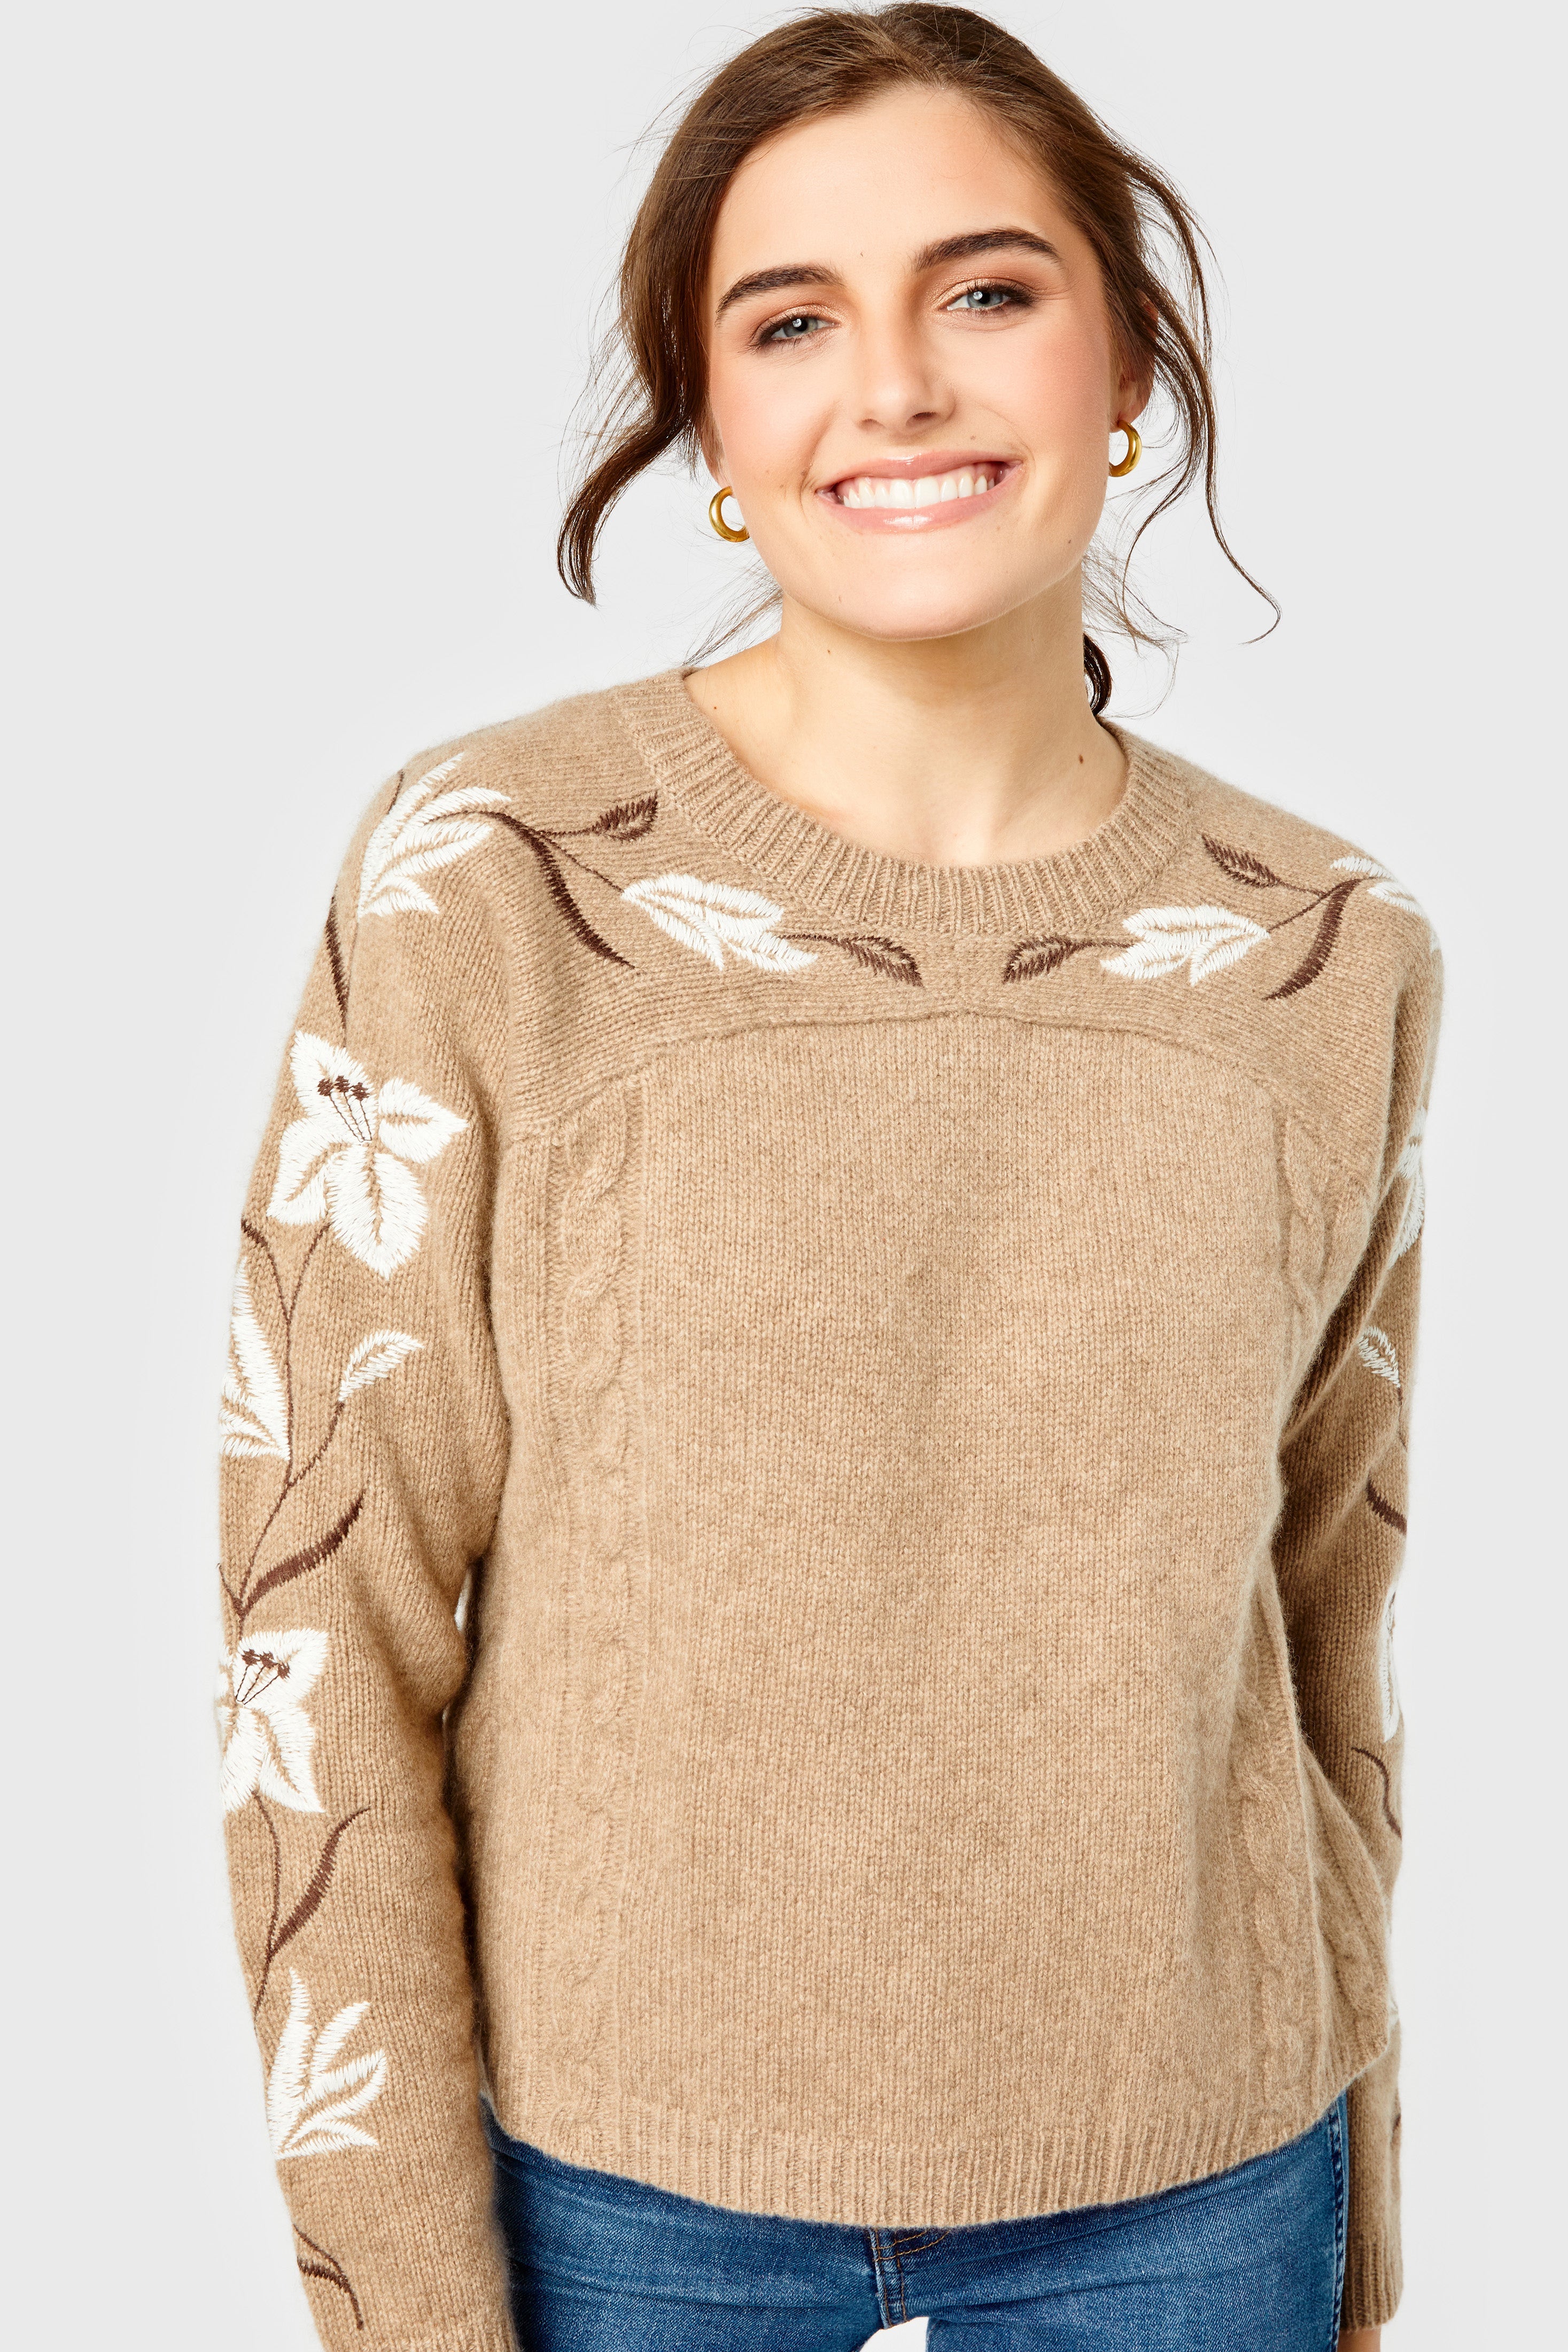 Quinn Sweater-Cashmere Embroidered-Jute by Cartolina